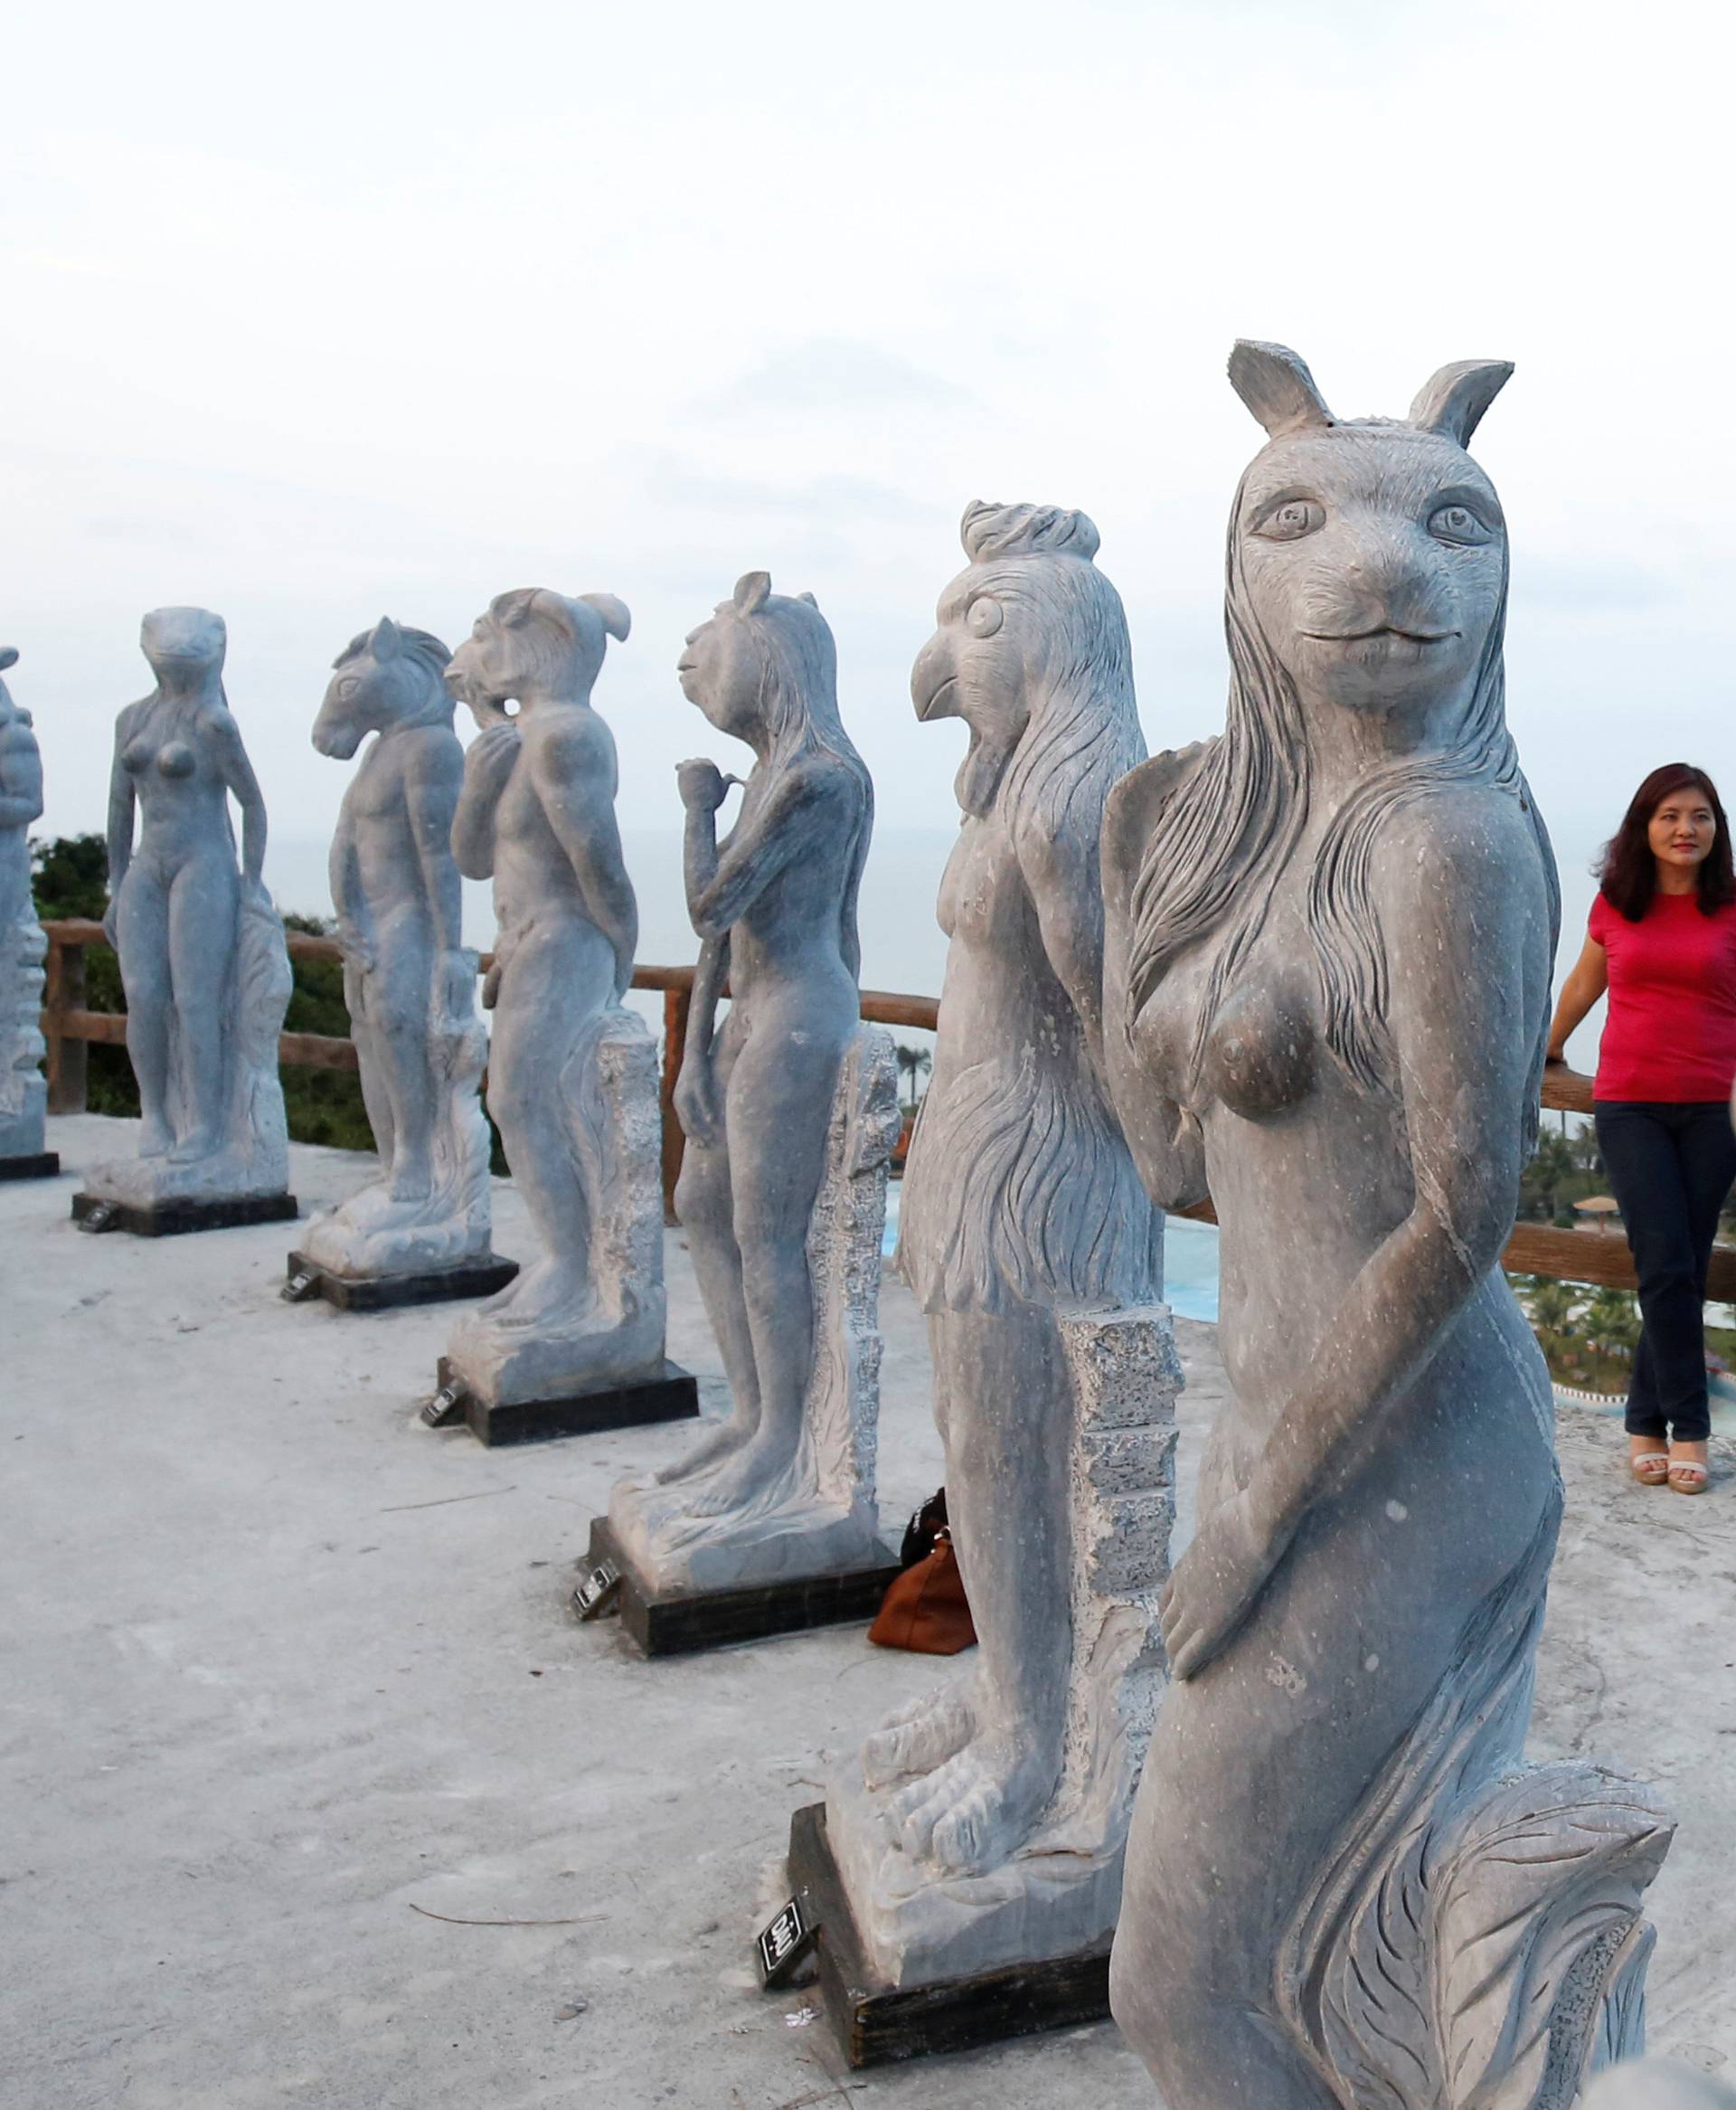 A woman stands near godlike sculptures with animal heads and human genitalia at Hon Dau resort in Hai Phong city, east of Hanoi